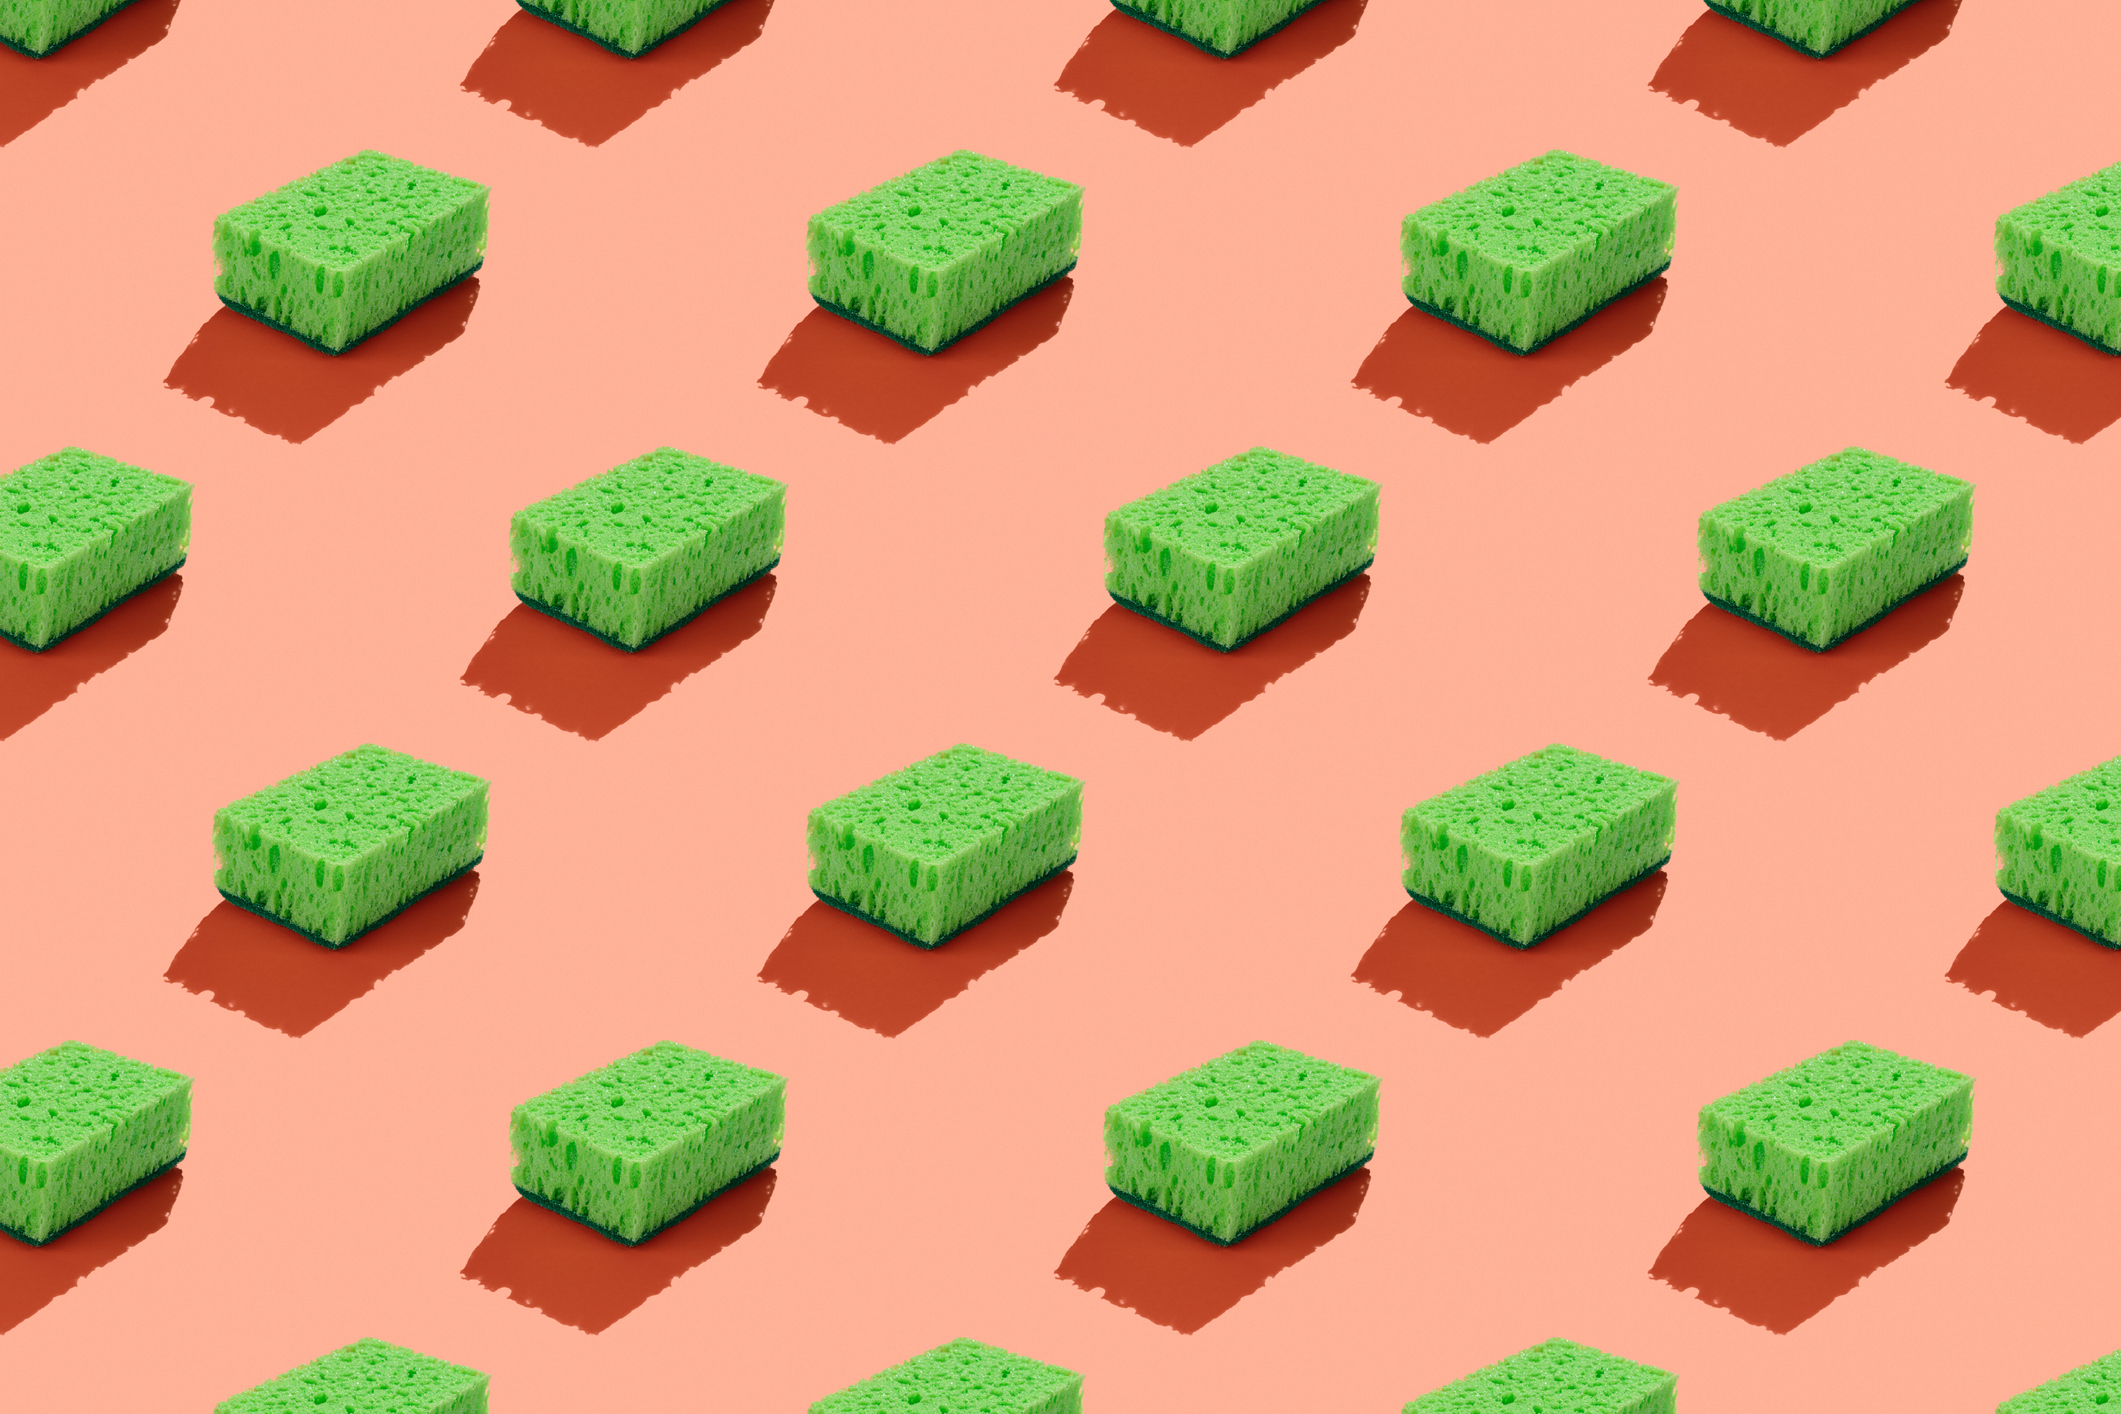 Green sponges on a pink background to symbolize green washing.